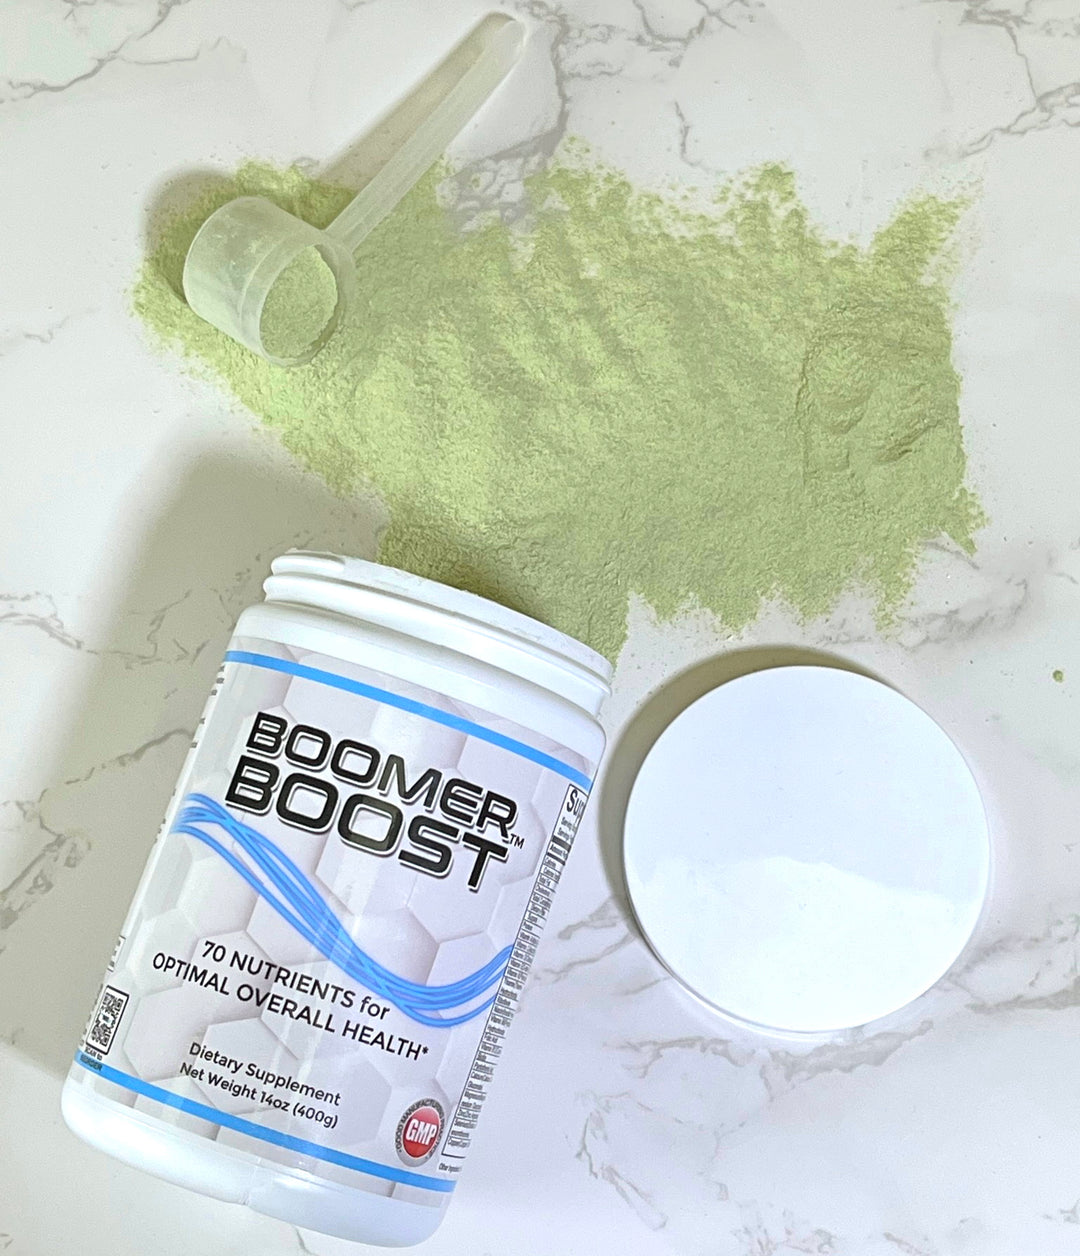 Boomer Boost a highly specialized nutritional supplement that can help increase energy.